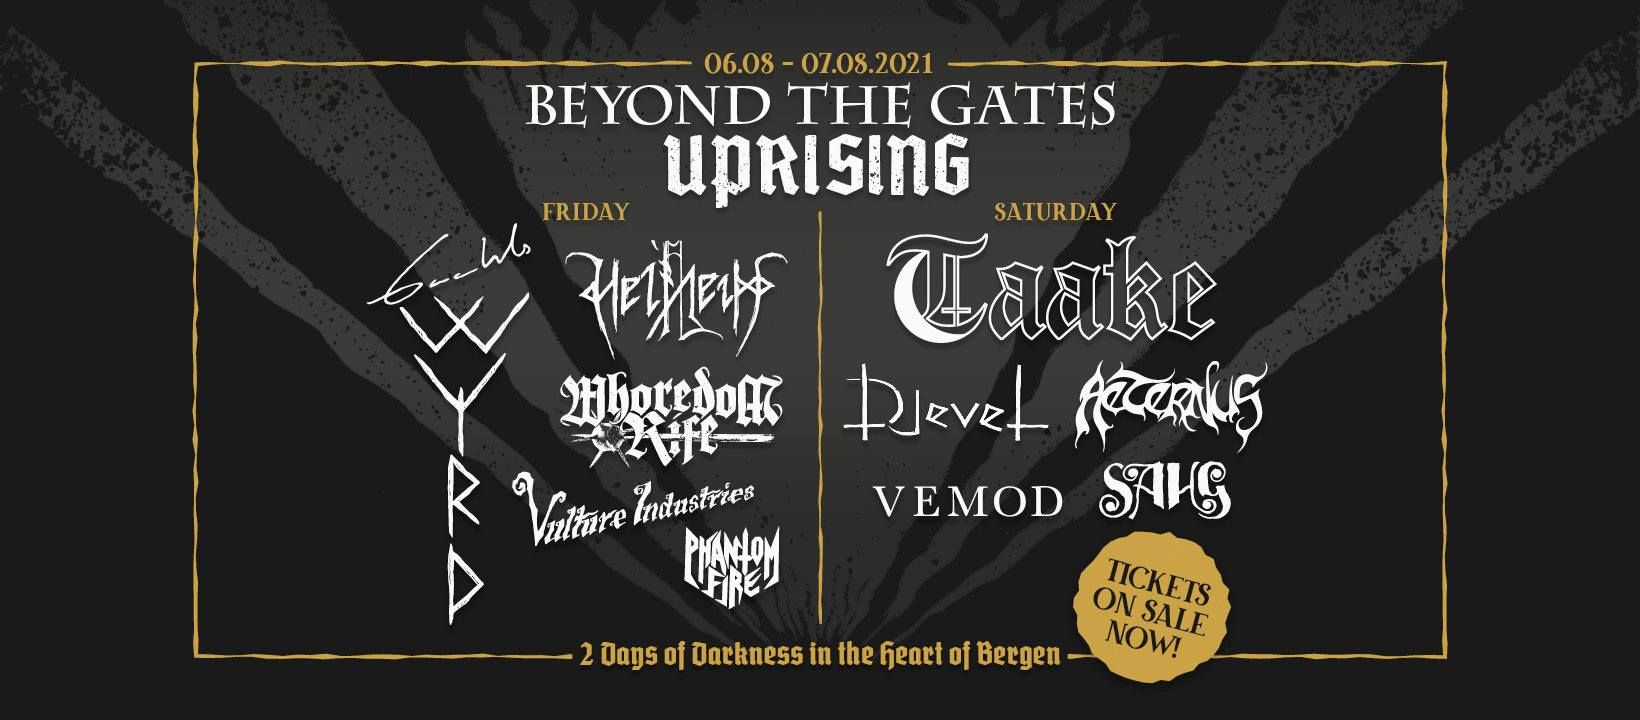 BEYOND THE GATES 2021 – Interview